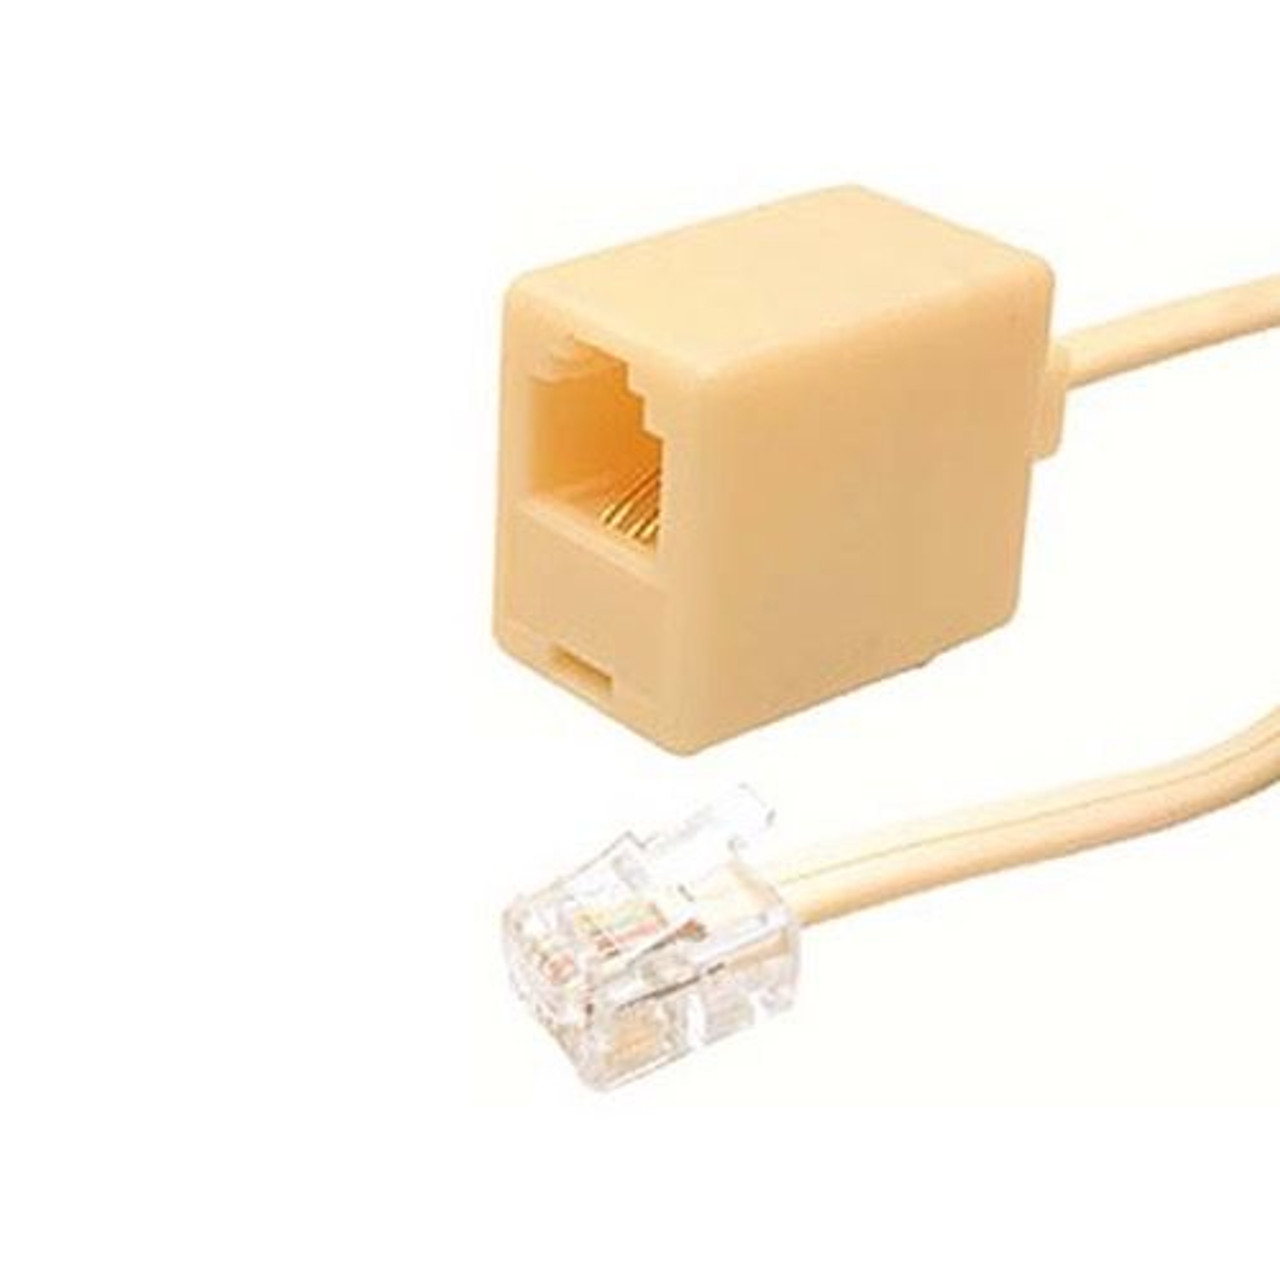 RJ11 4 Conductor Cross Wired Modular Telephone Cable - 7 FT